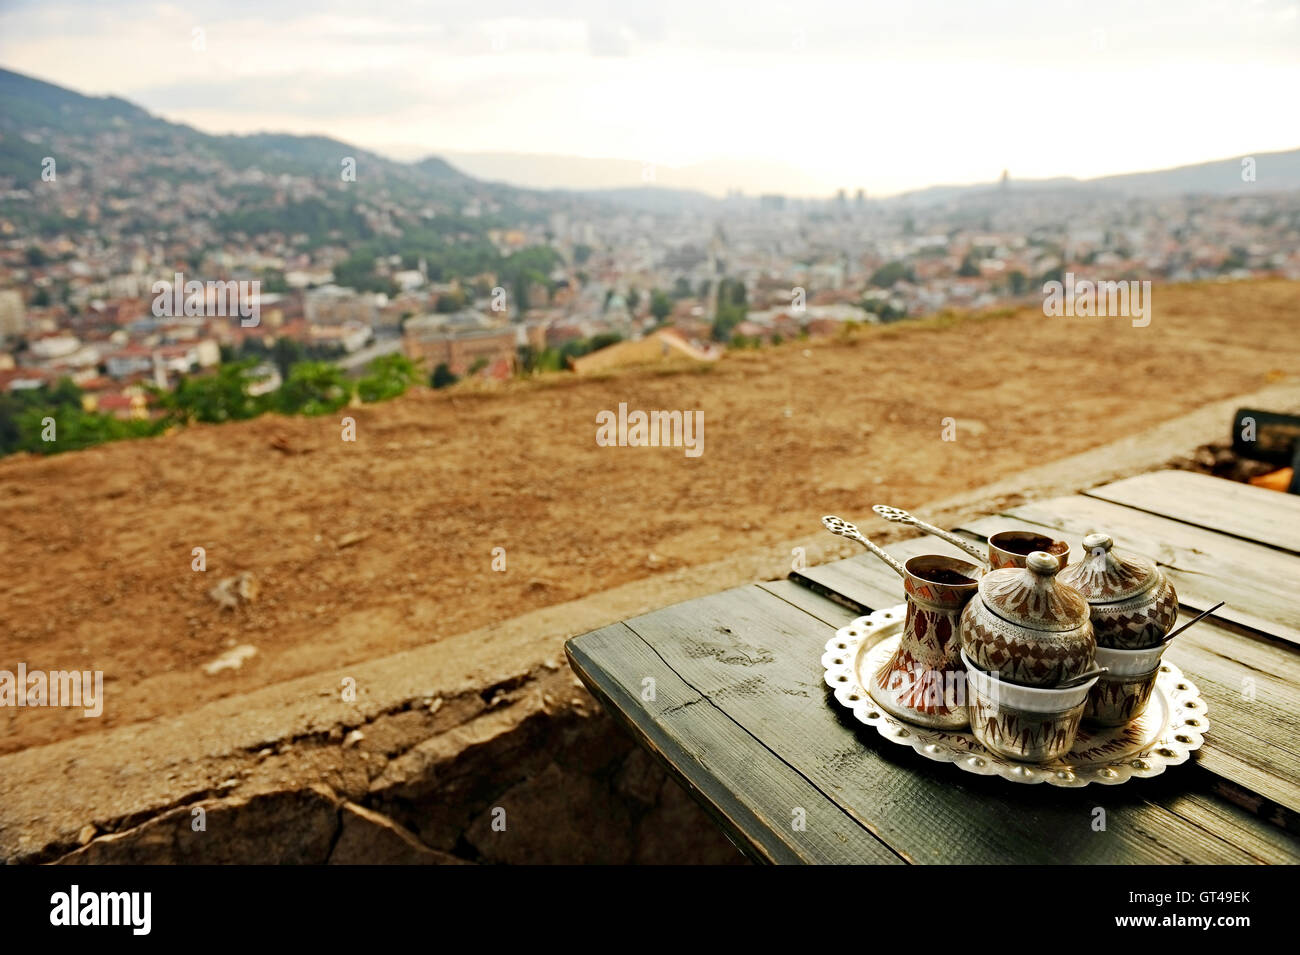 Two cups of bosnian traditional coffee on a wooden table Stock Photo